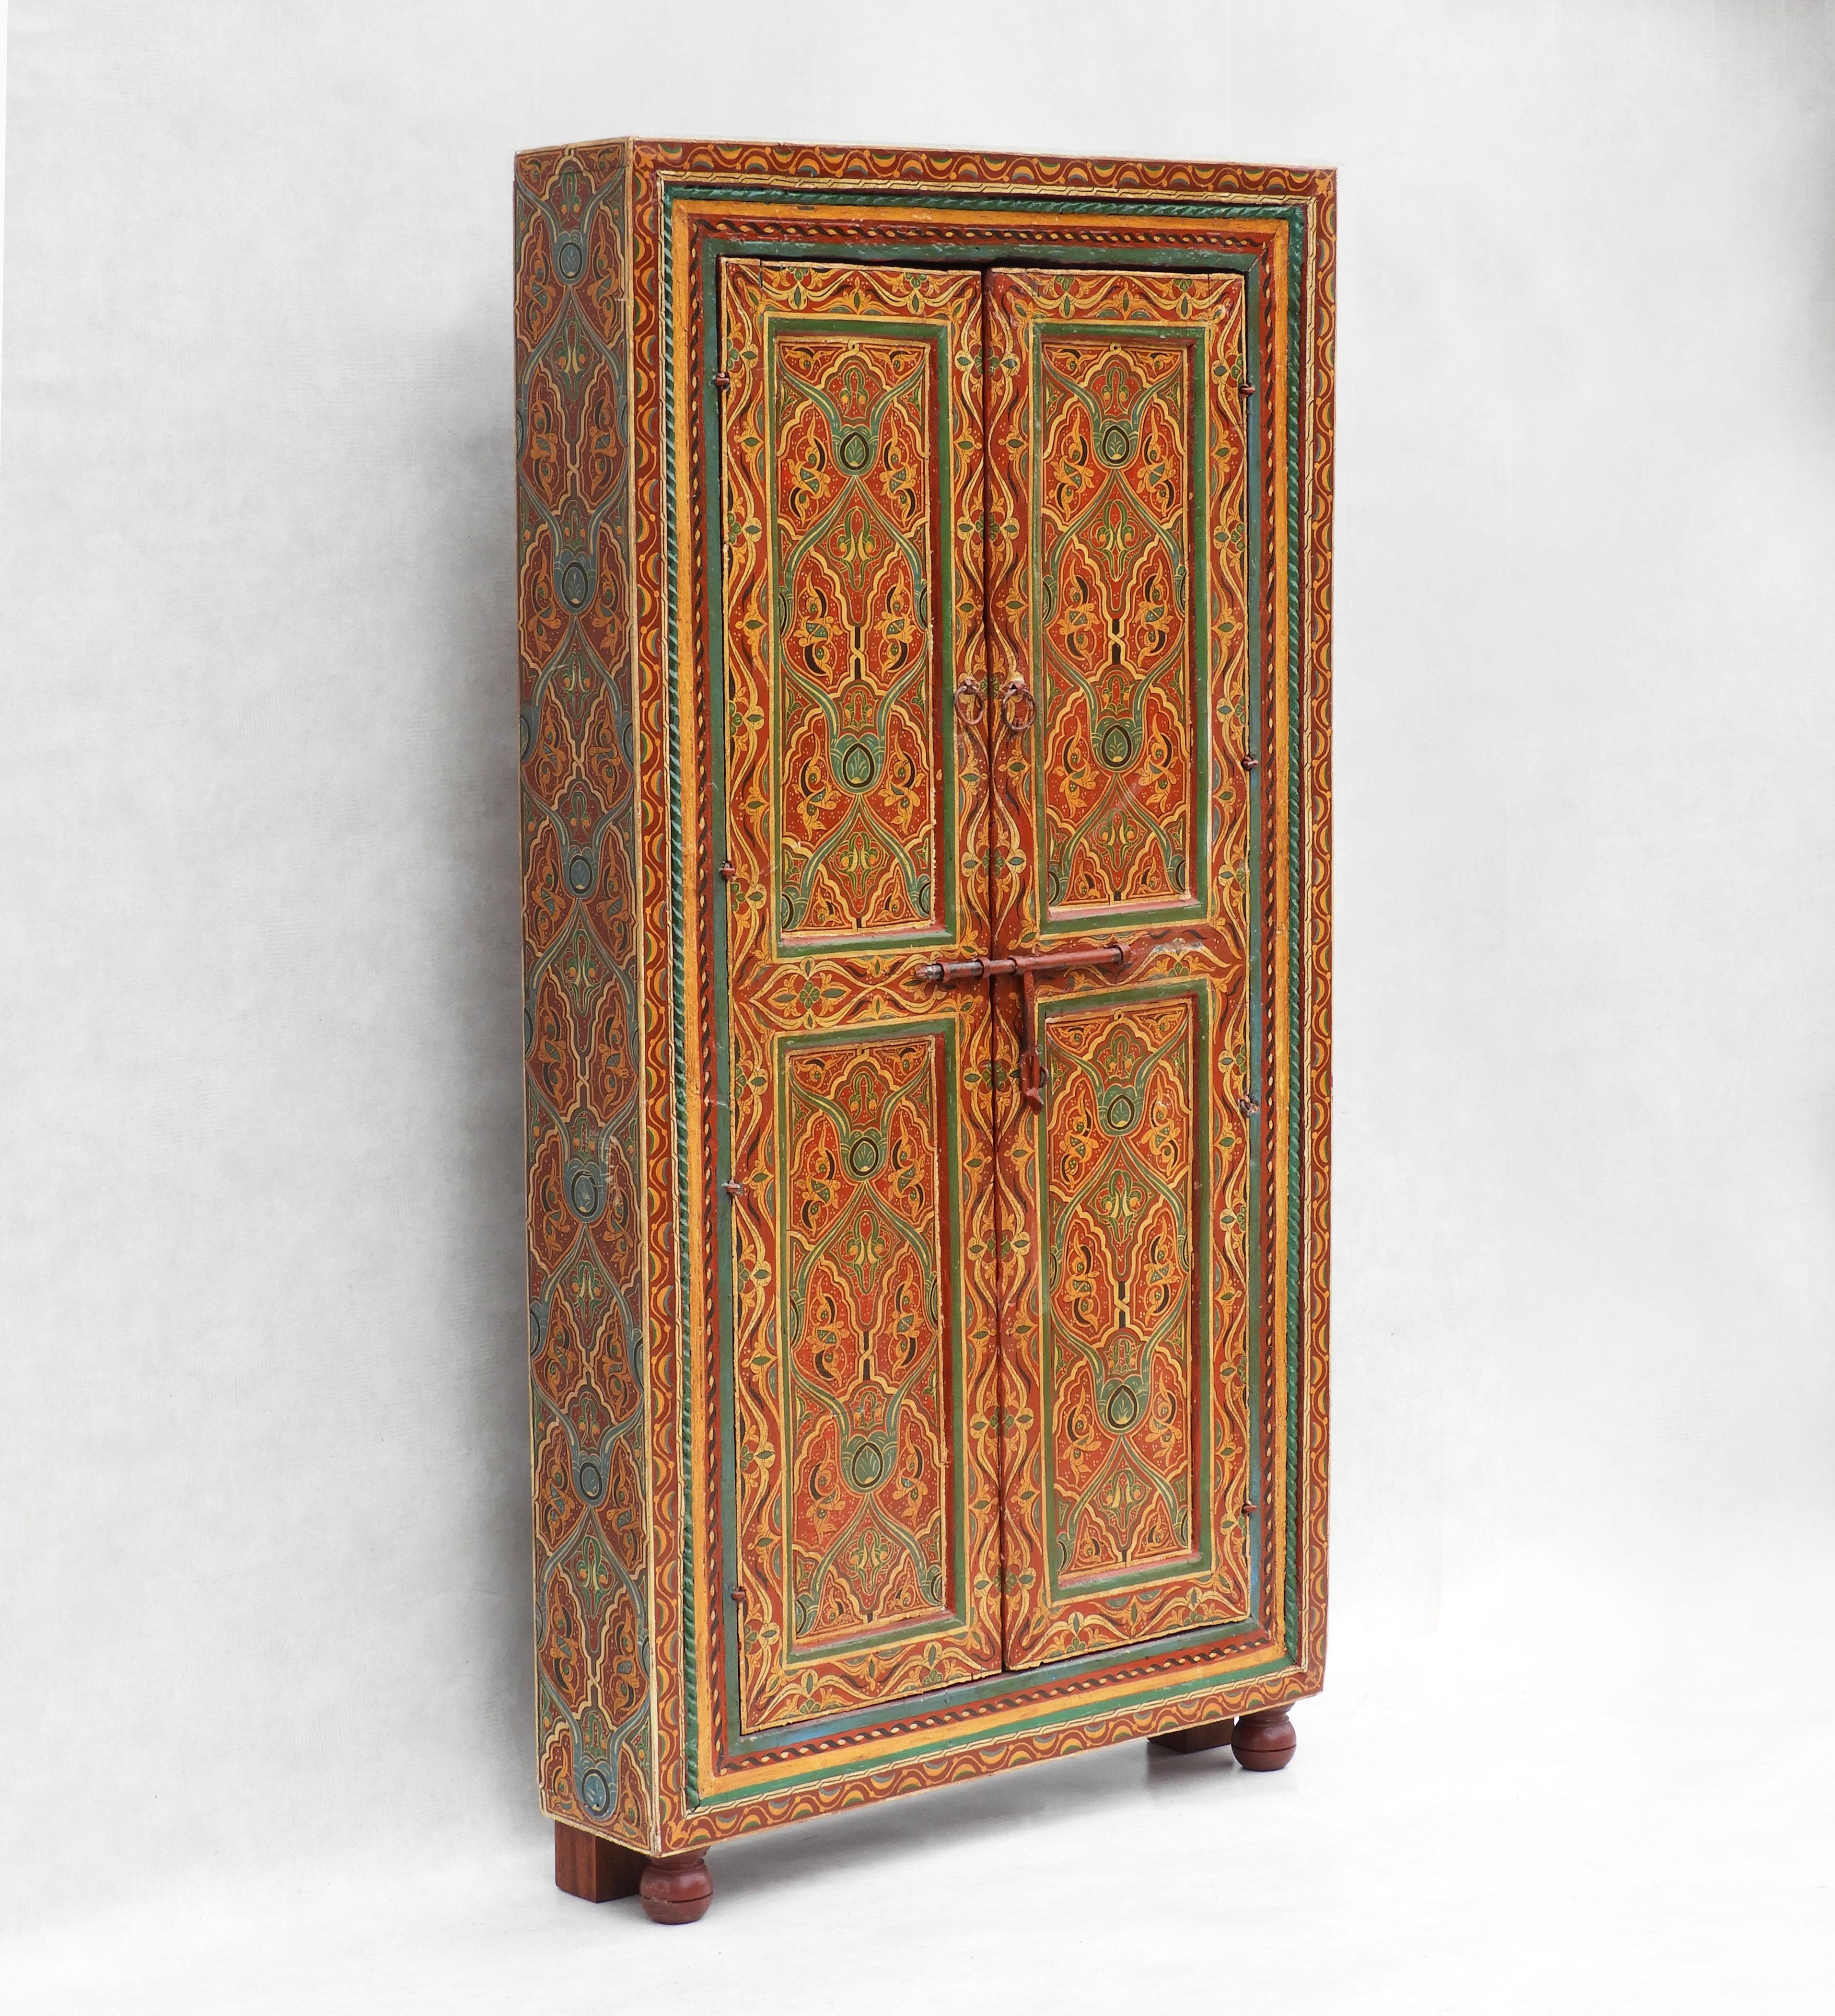 Hand-Crafted Morrocan Painted Open Backed Cupboard Early 20th Century Folk Art